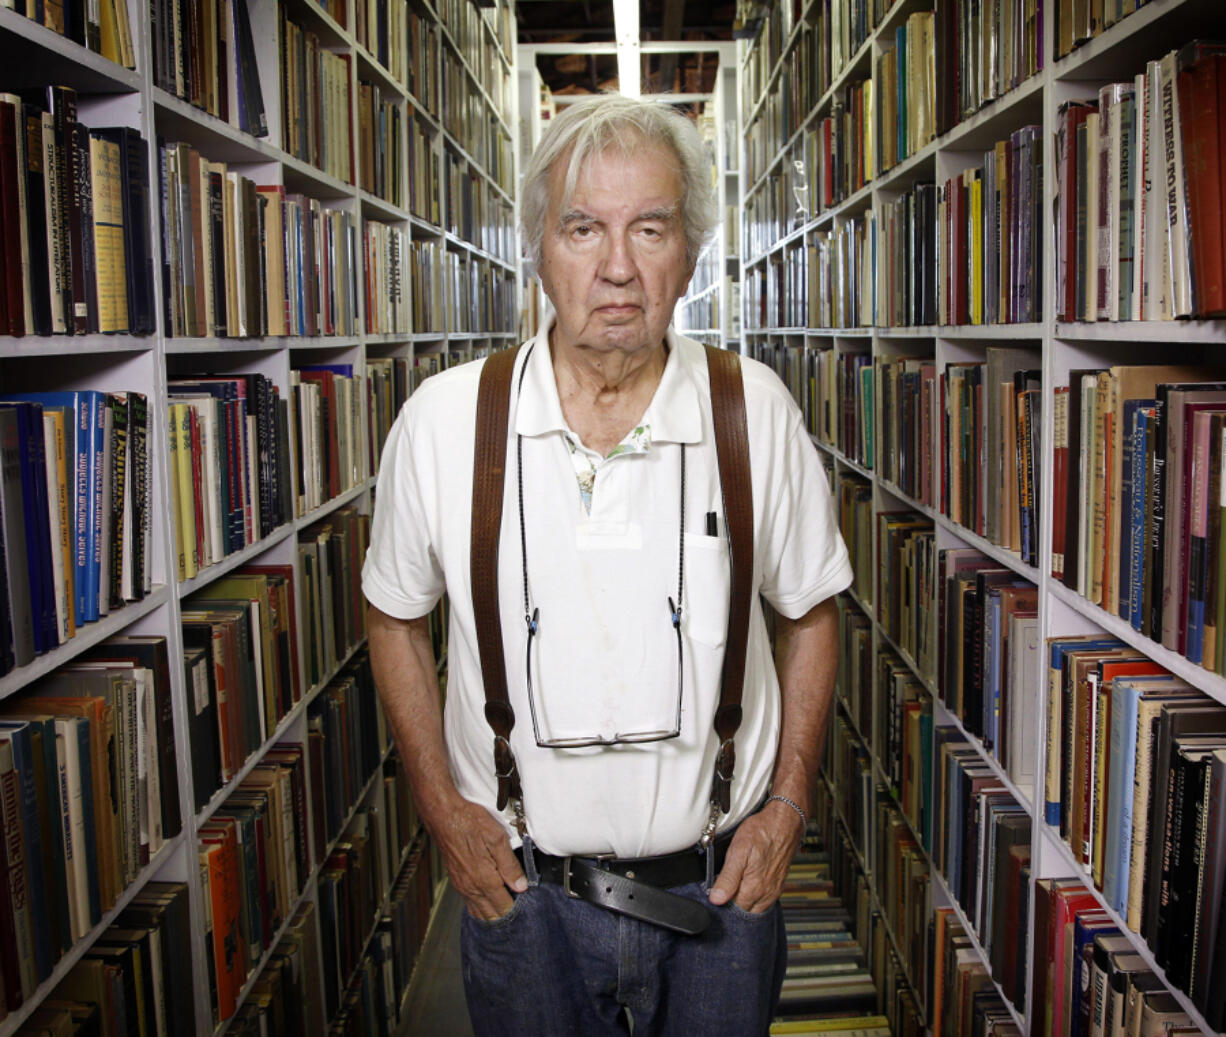 Author Larry McMurtry stands in his Archer City bookstore during a liquidation sale in 2012.